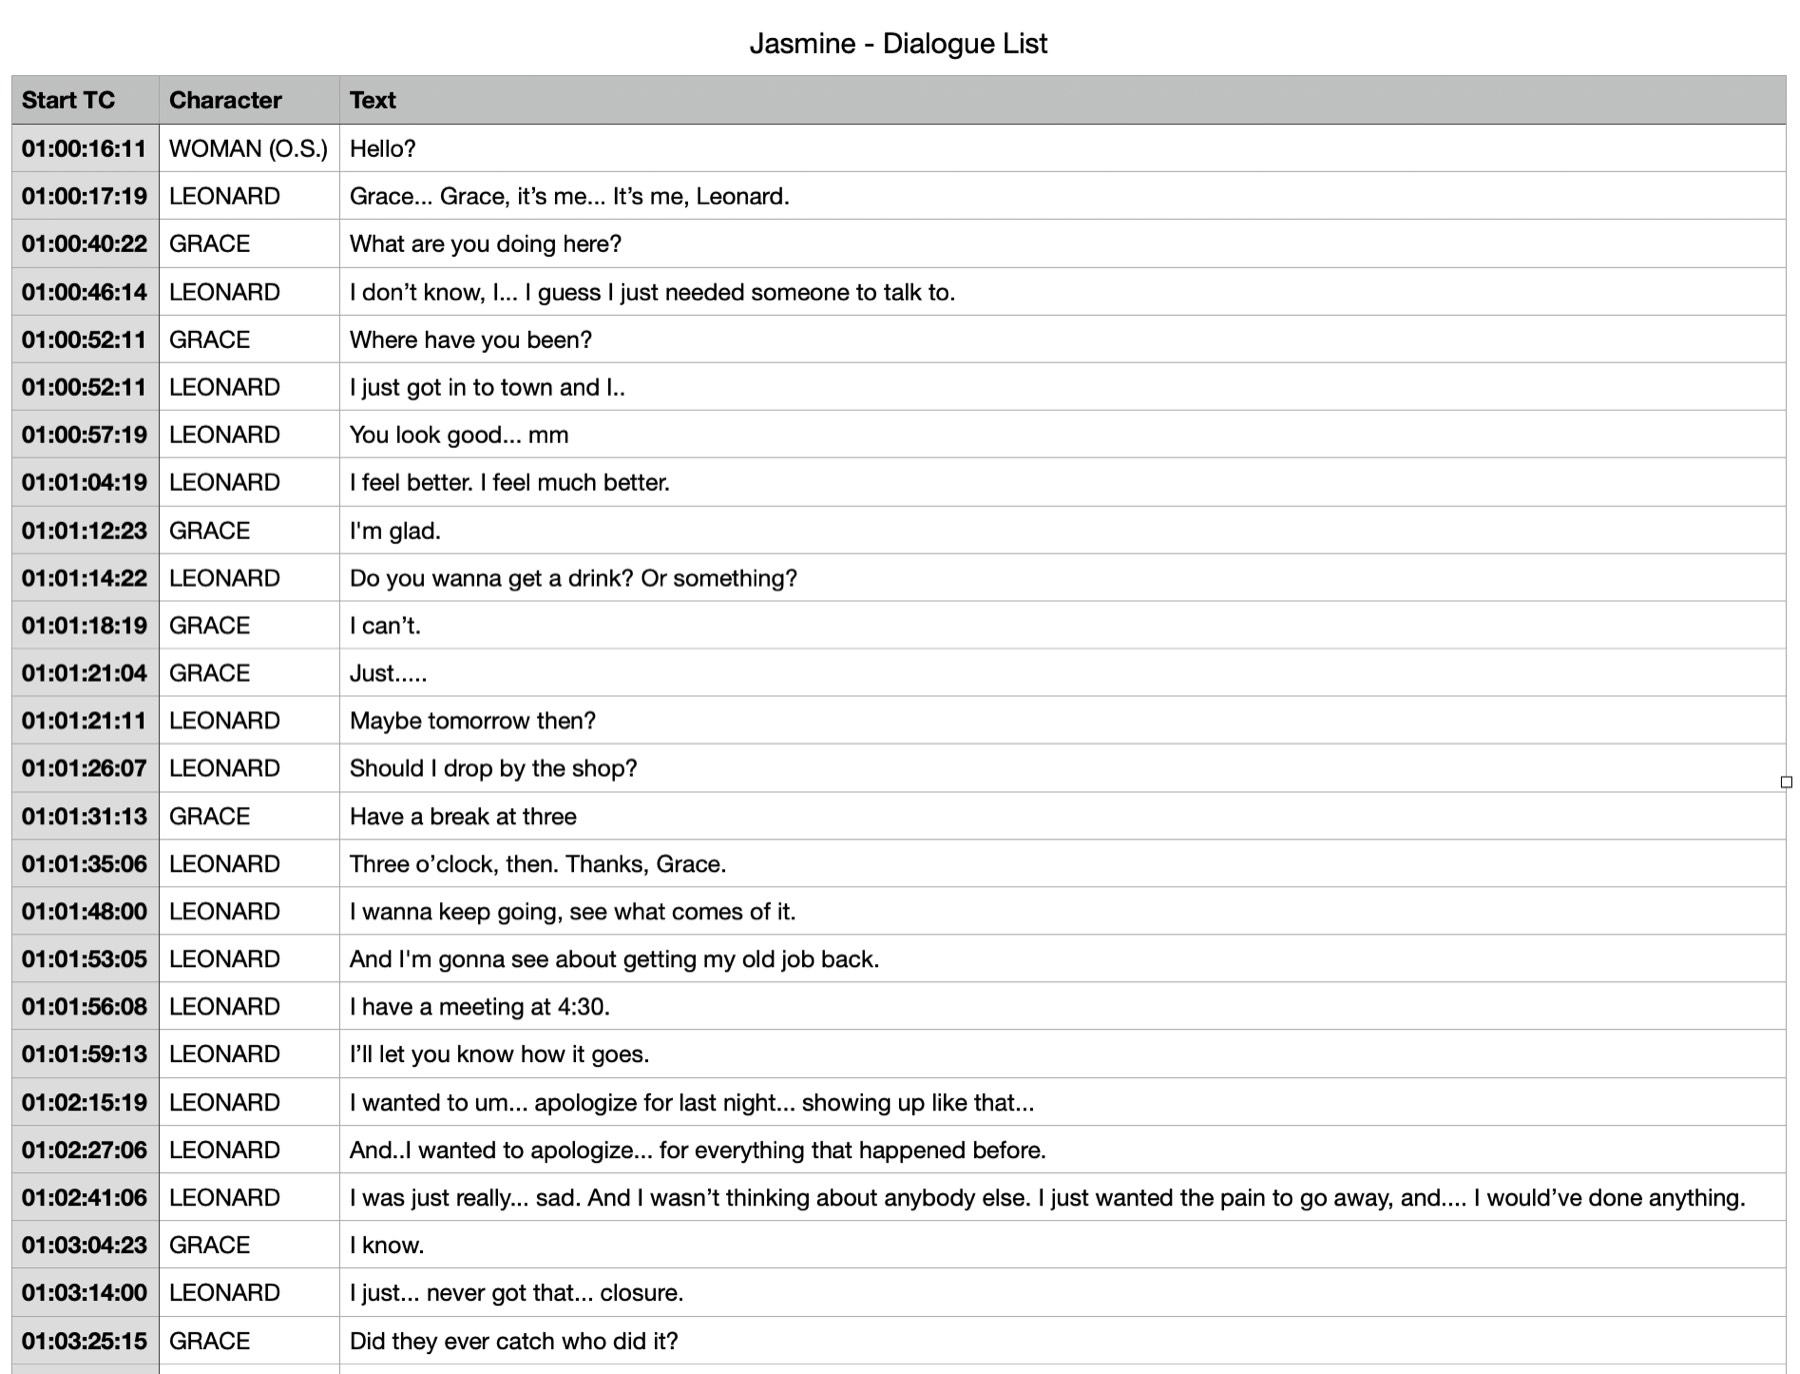 Dialogue list Example